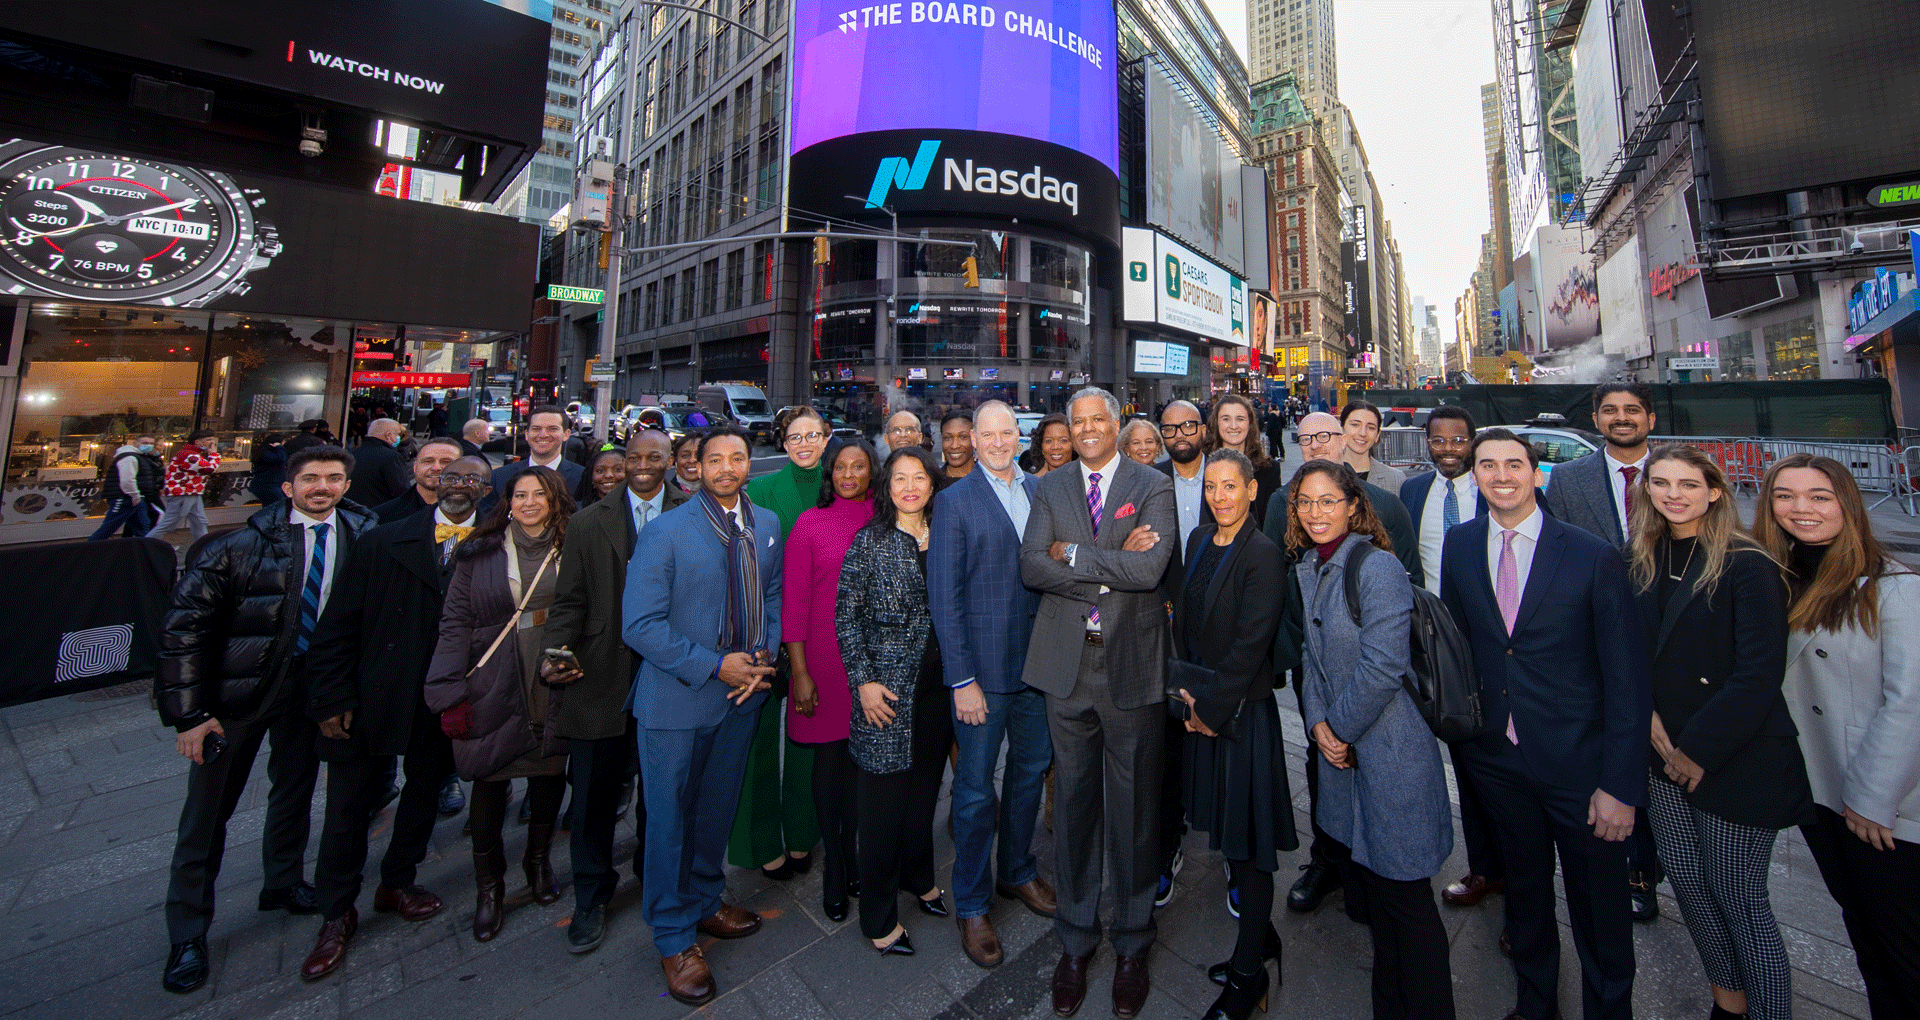 A group photo of The Board Challenge, with Times Square in the back ground.